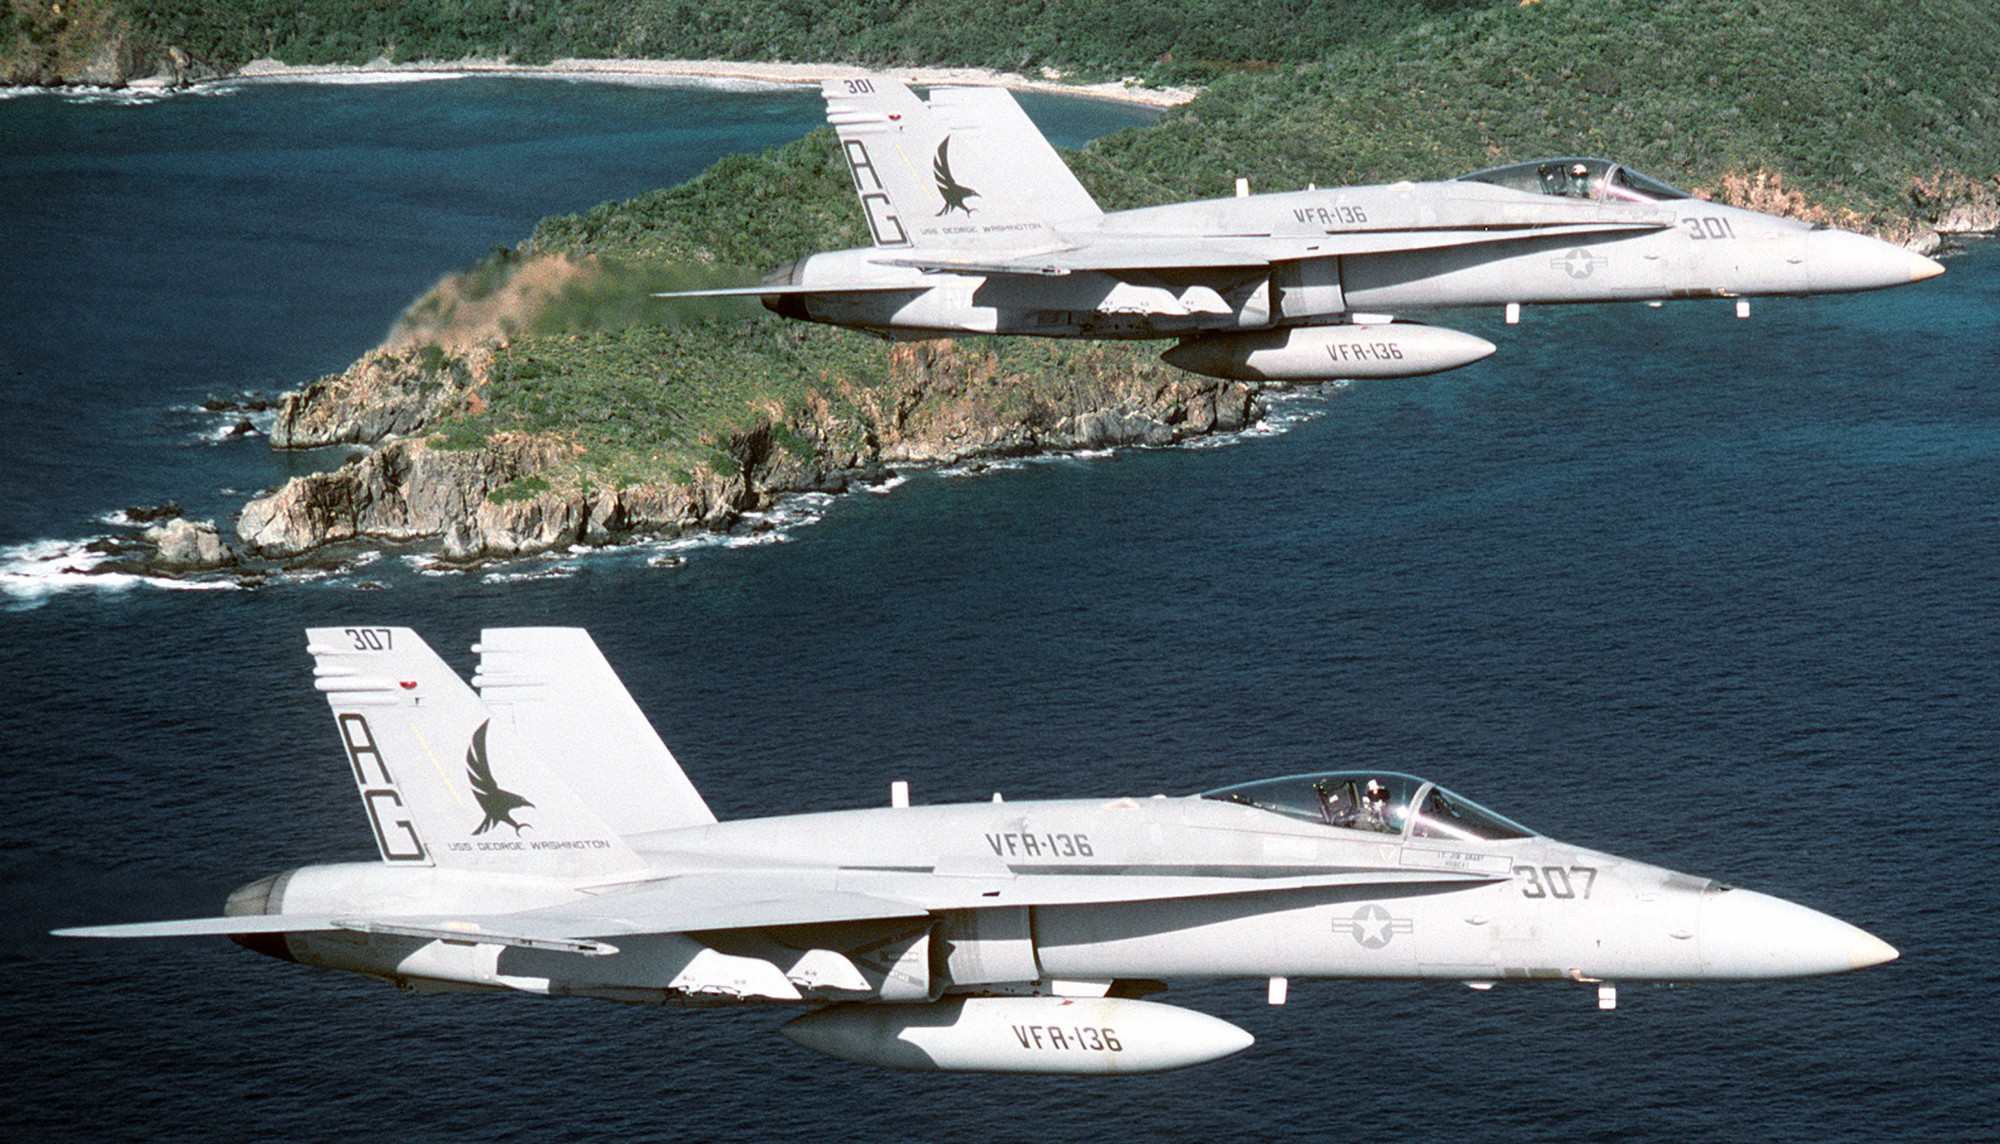 vfa-136 knighthawks strike fighter squadron f/a-18c hornet 1992 74 cvw-7 naval station roosevelt roads puerto rico